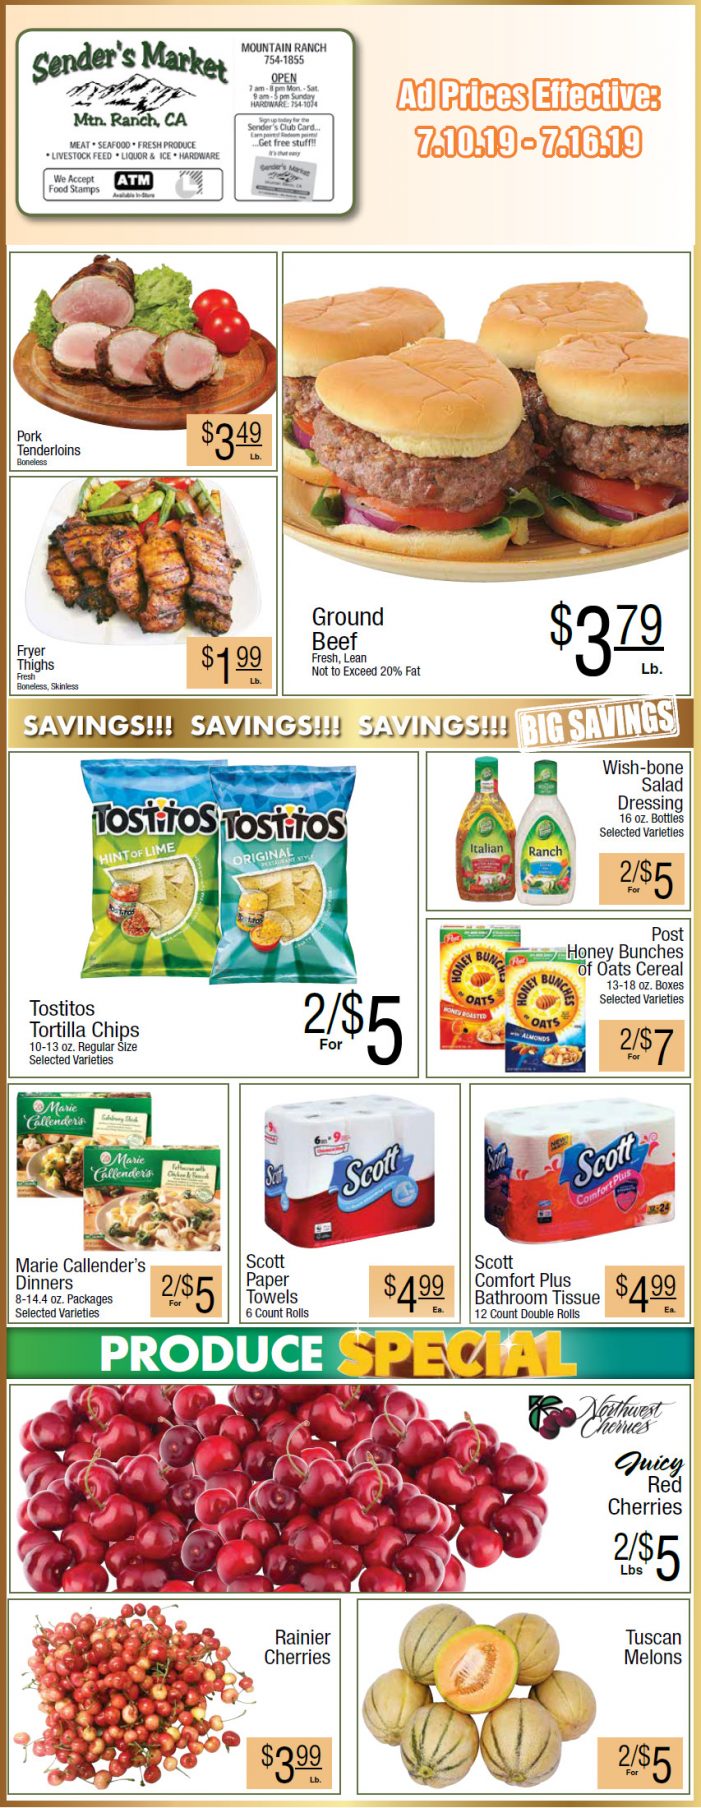 Sender’s Market Weekly Ad & Grocery Specials Through July 16th